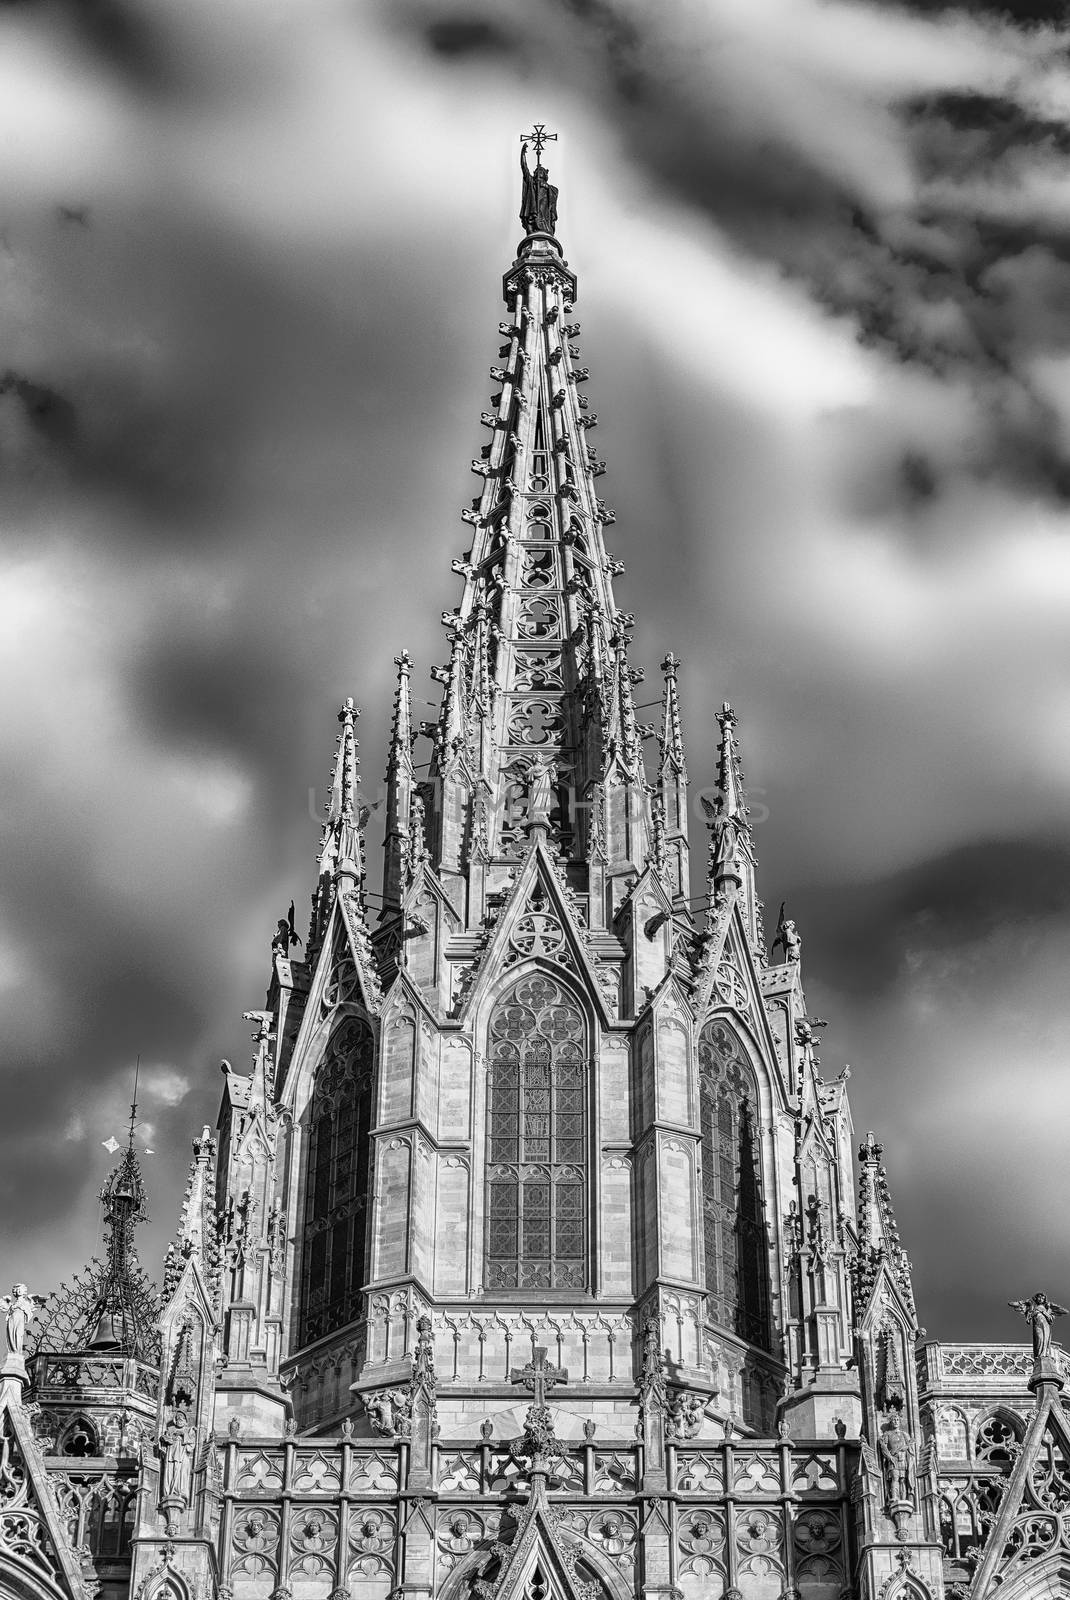 Main tower of the Barcelona Cathedral, Catalonia, Spain by marcorubino